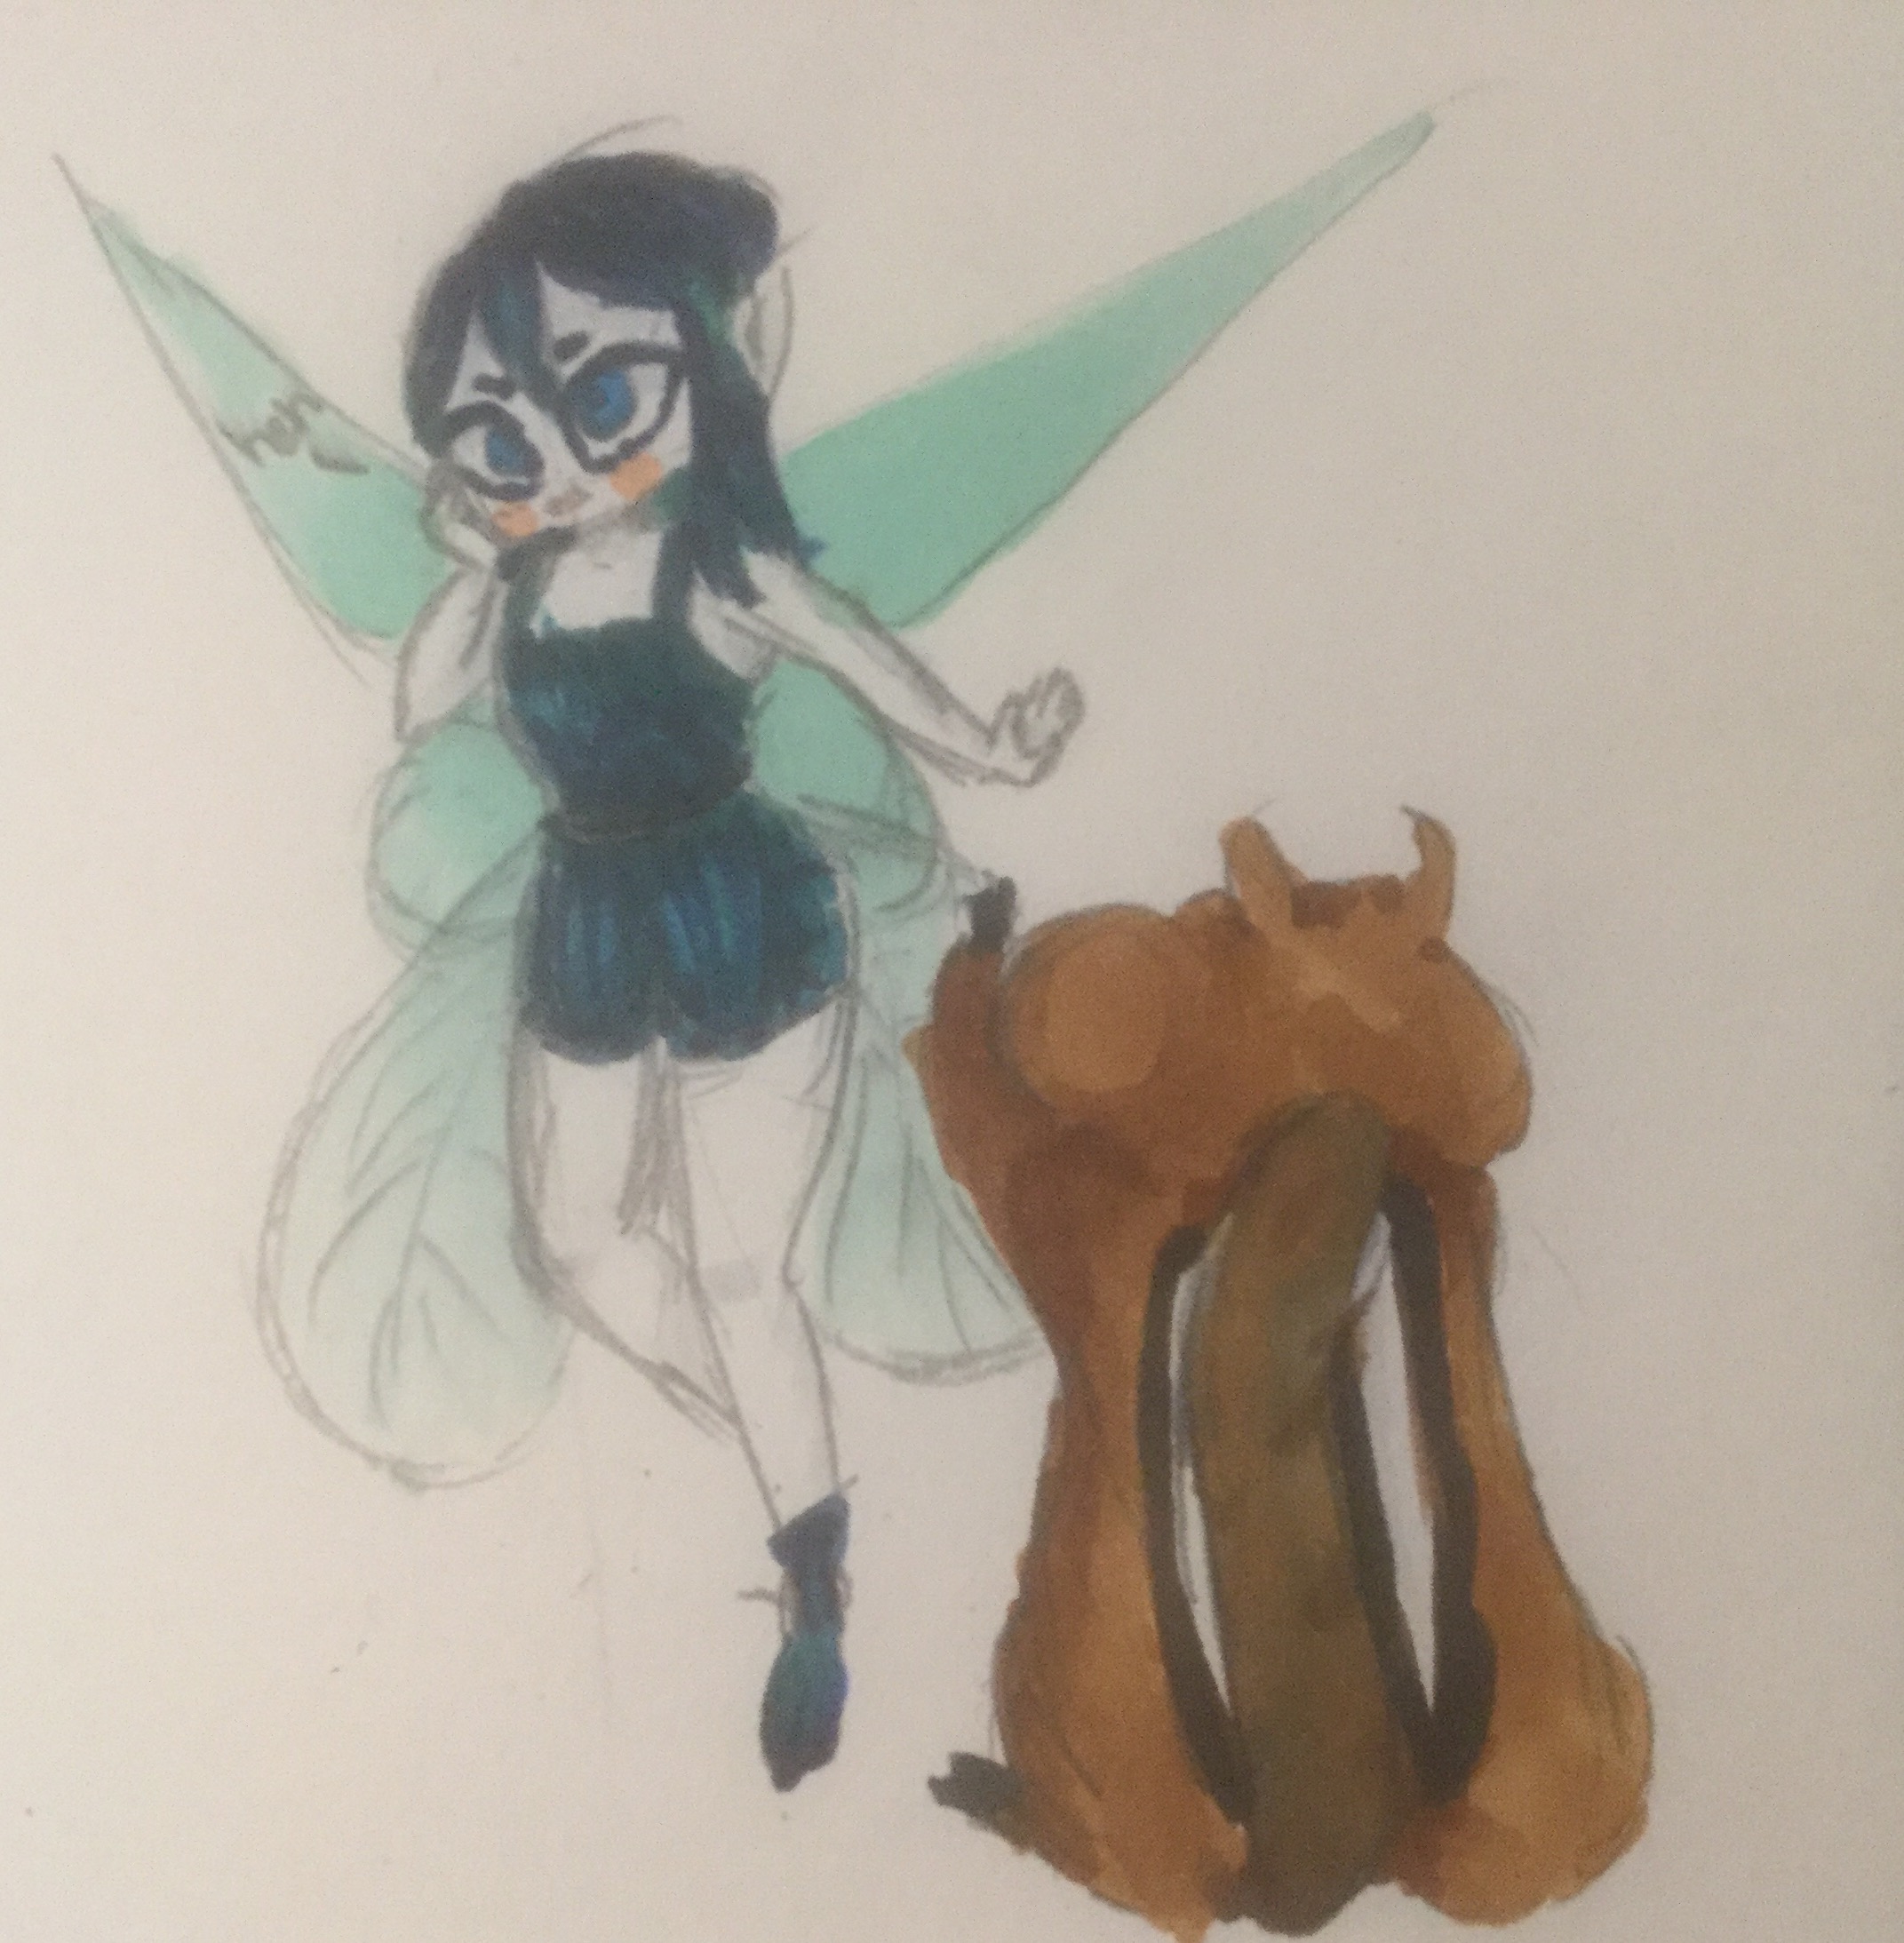 Weird cross eyed beetle fairy says no to a chipmunk.